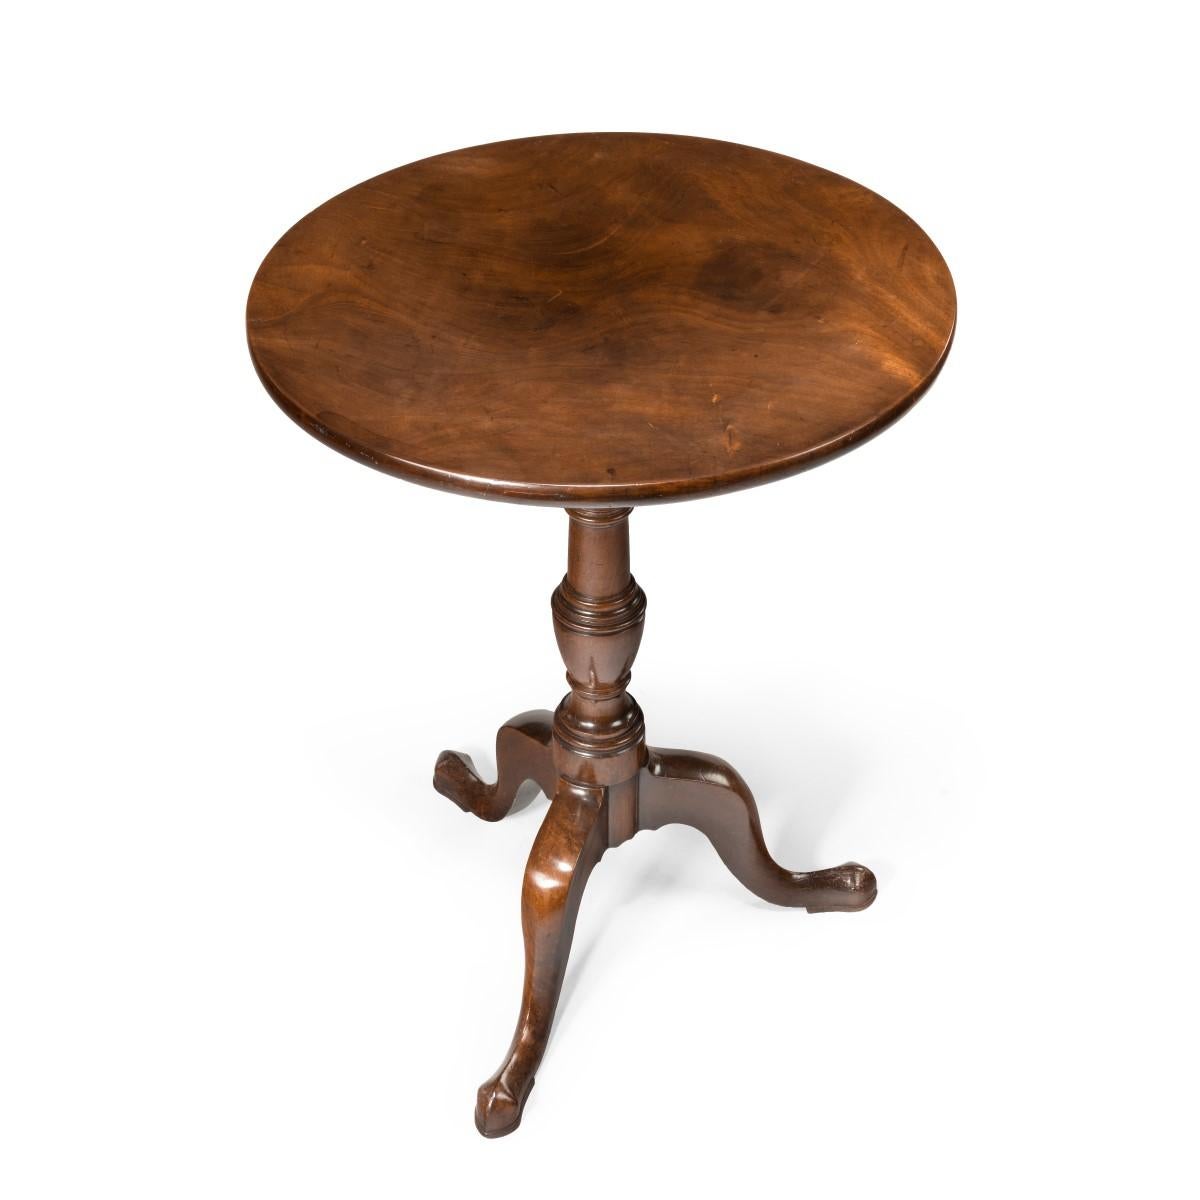 Early 19th Century George III Mahogany Tilt-Top Occasional Table